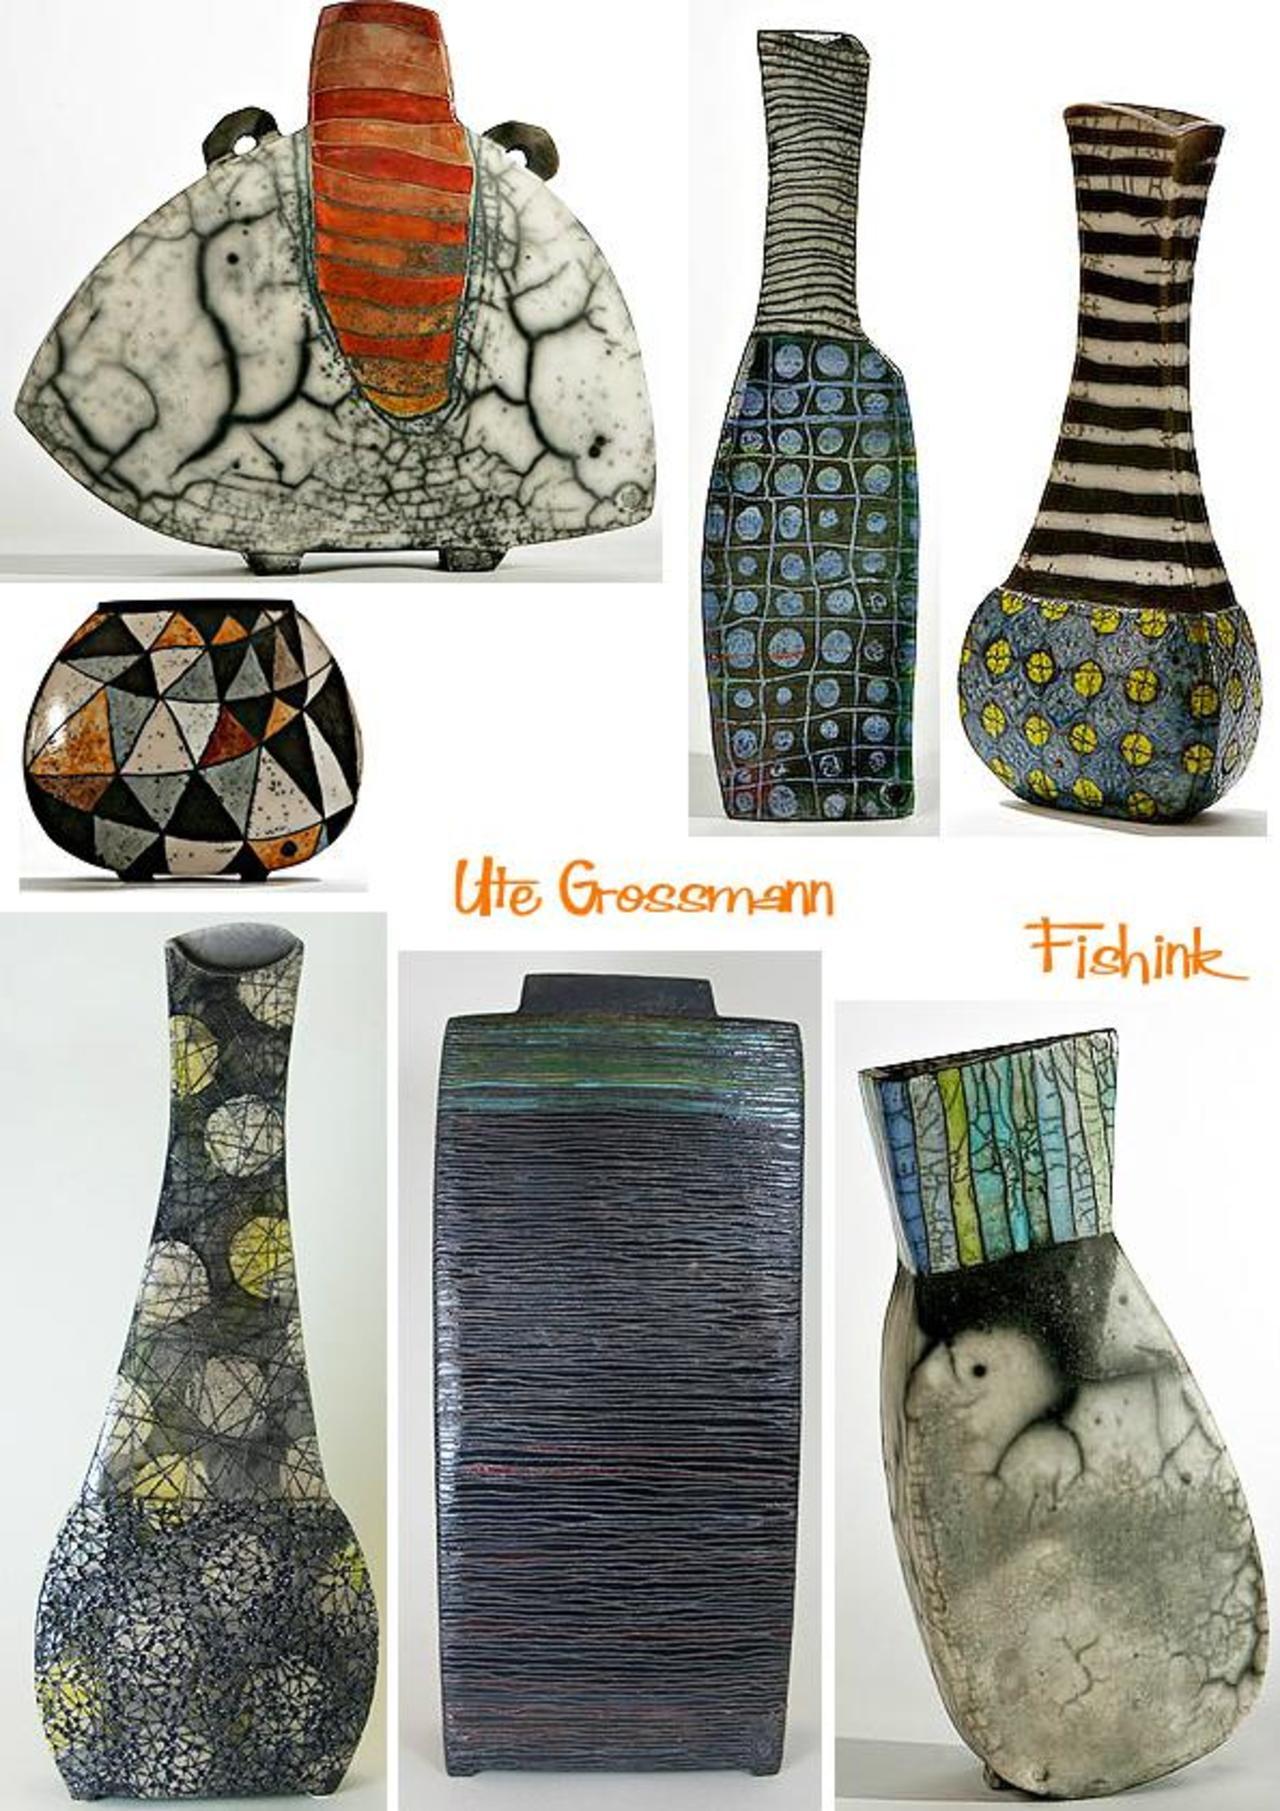 http://wp.me/pY4YW-3Gg #UteGrossman Stylish decorated #ceramics #art.Please share, join my blog and RT, Thank you. http://t.co/3WJkiPXkjZ